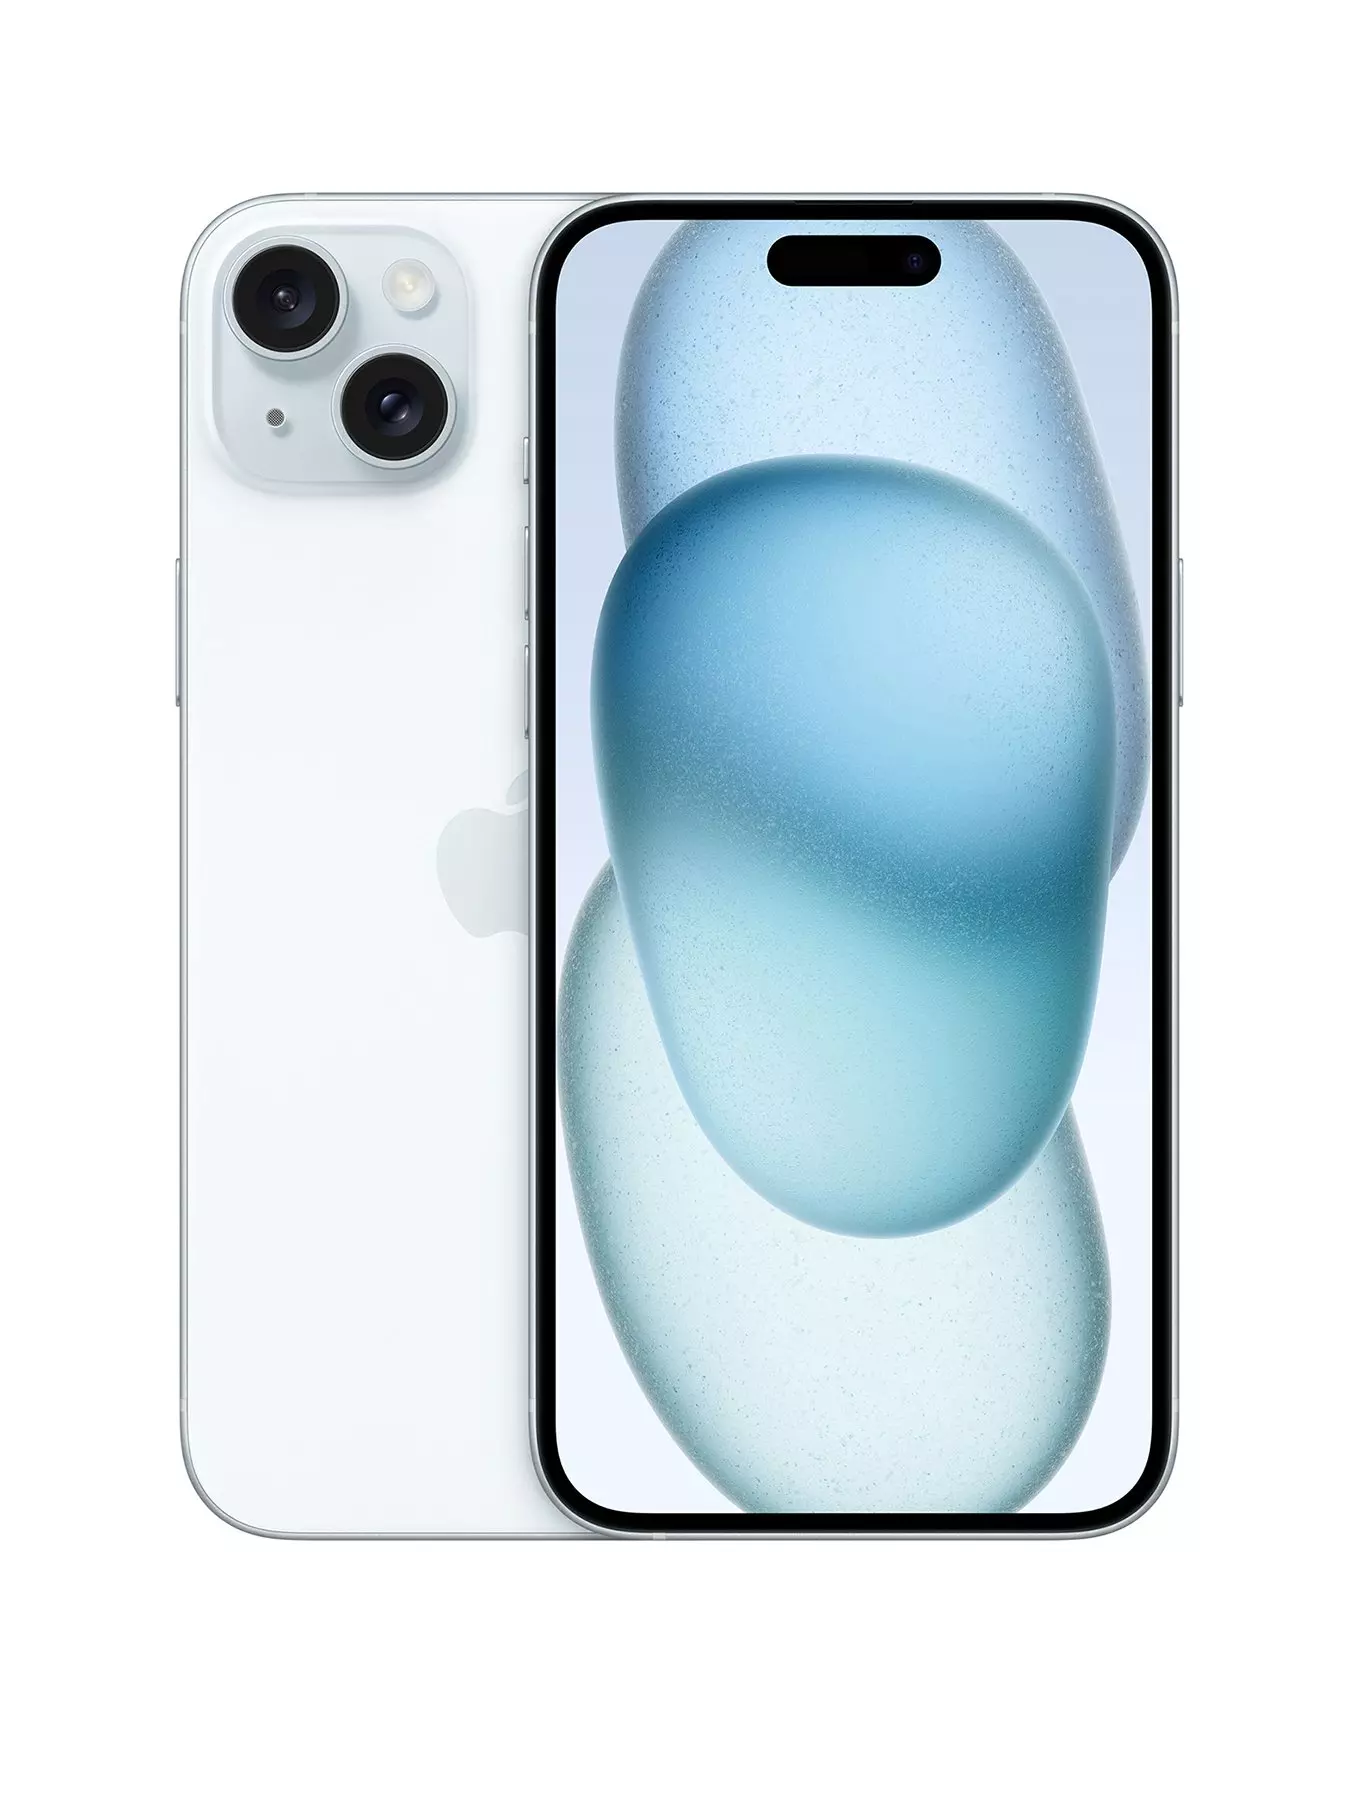 MICHAEL KORS MK WHITE 2 iPhone XS Max Case Cover